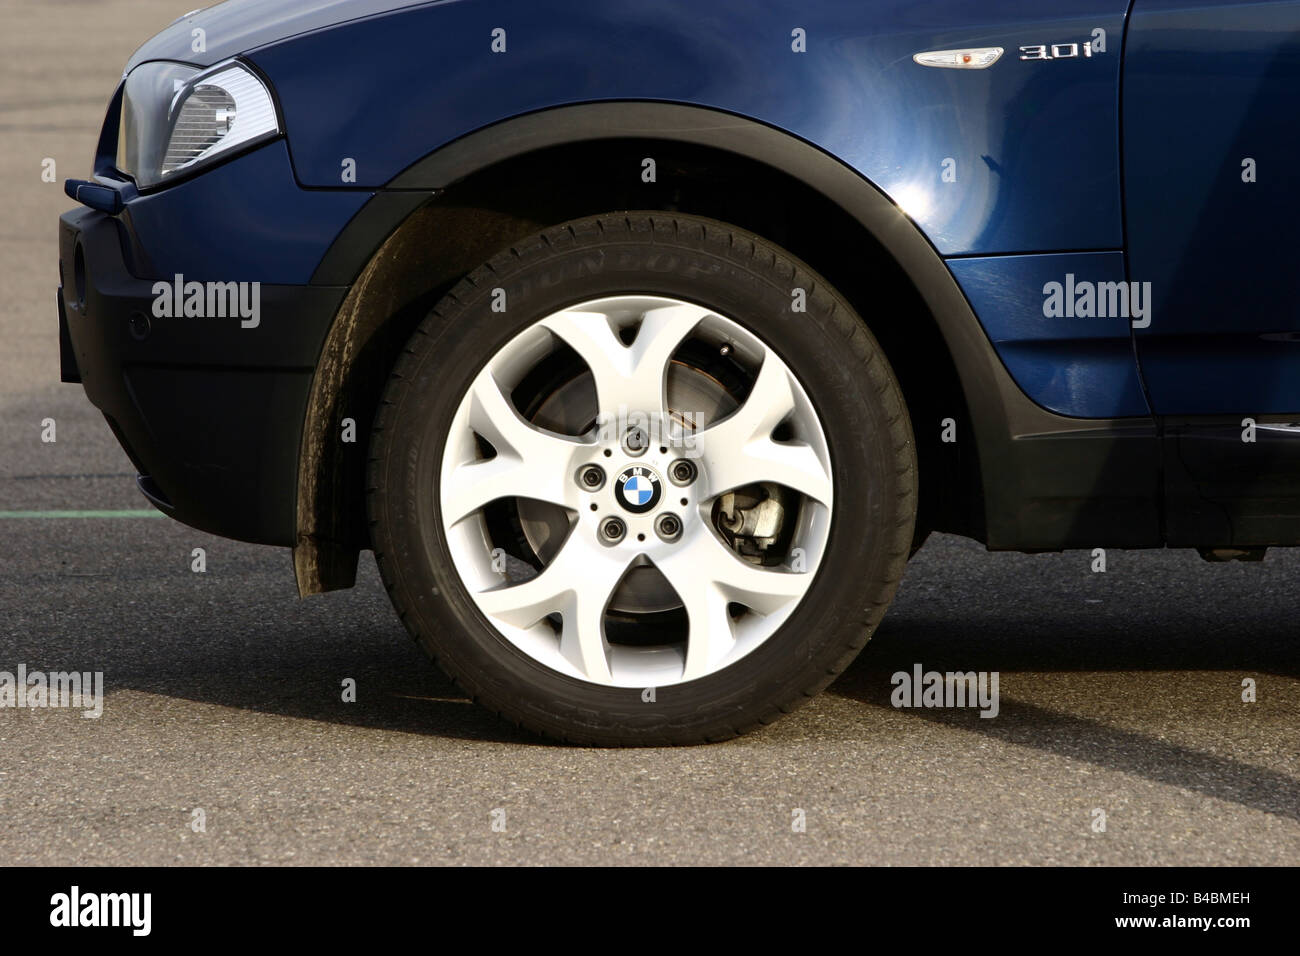 Car, BMW X3 3.0i, cross country vehicle, model year 2003-, dark blue, FGHDS, Detailed view, Front tyres, Front wheel, technique/ Stock Photo